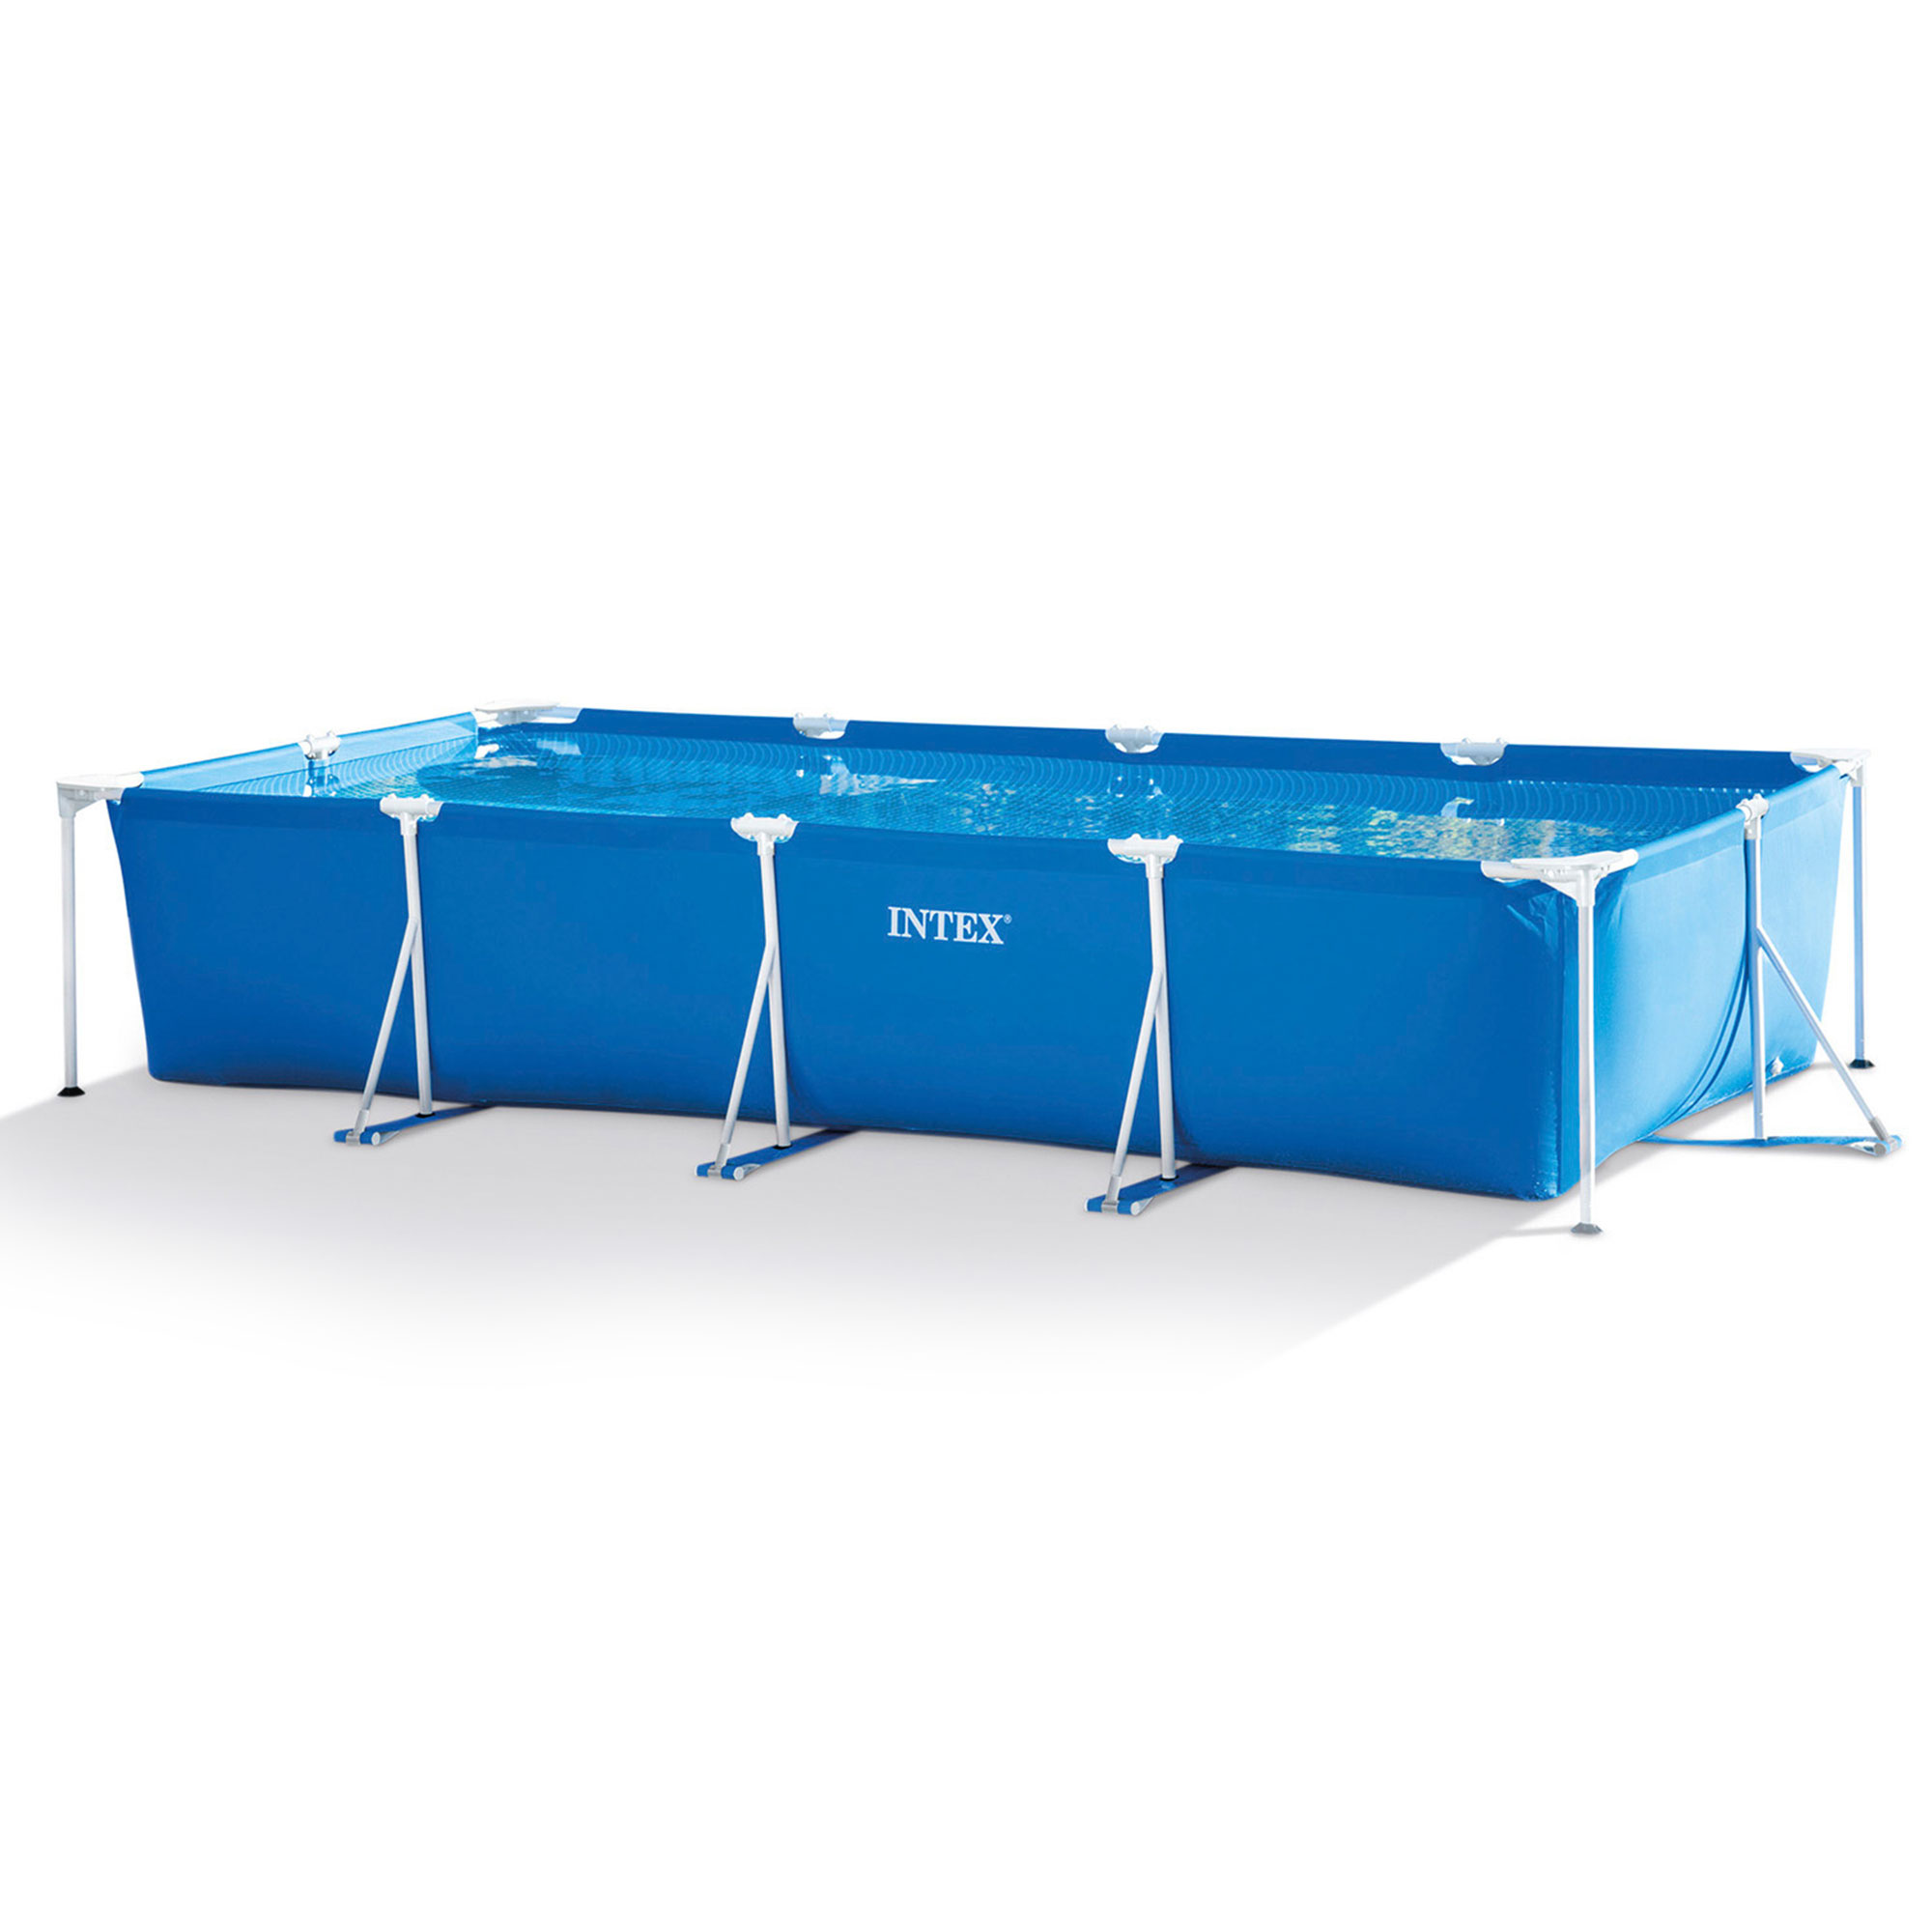 Intex 14.75' x 33" Rectangular Frame Above Ground Outdoor Swimming Pool - image 1 of 12